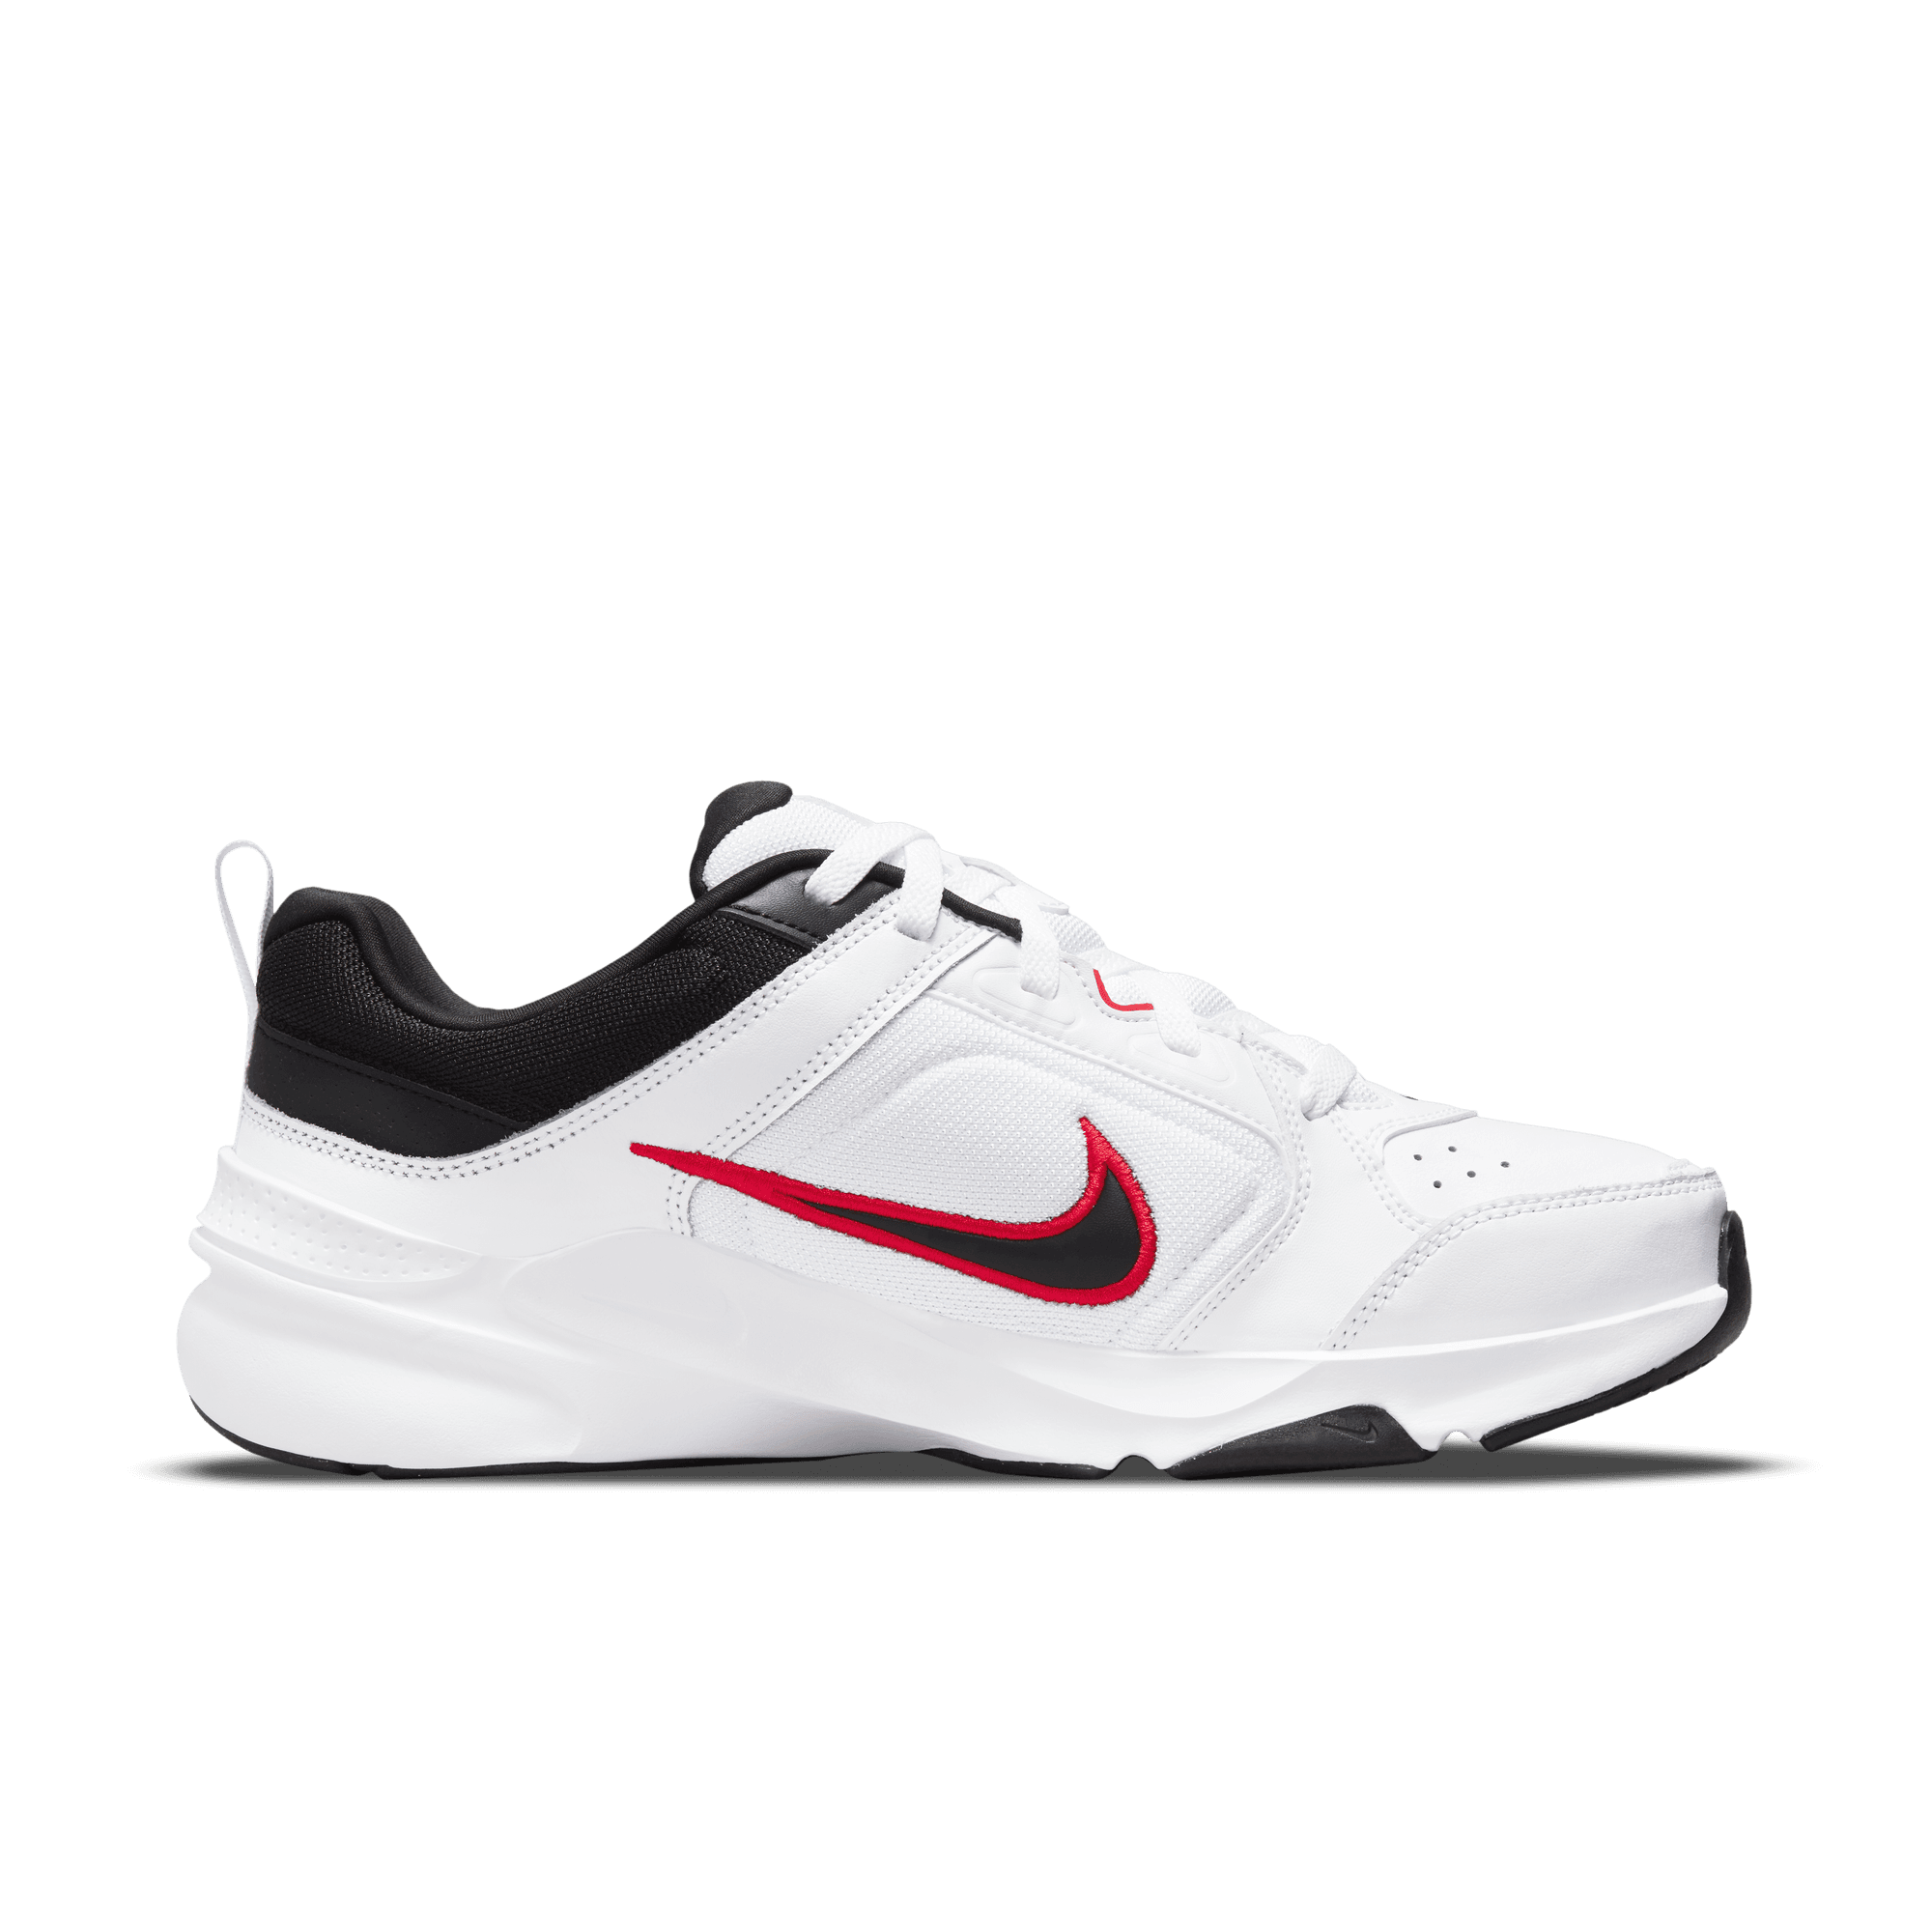 NIKE DEFY ALL DAY MEN'S TRAINING SHOES